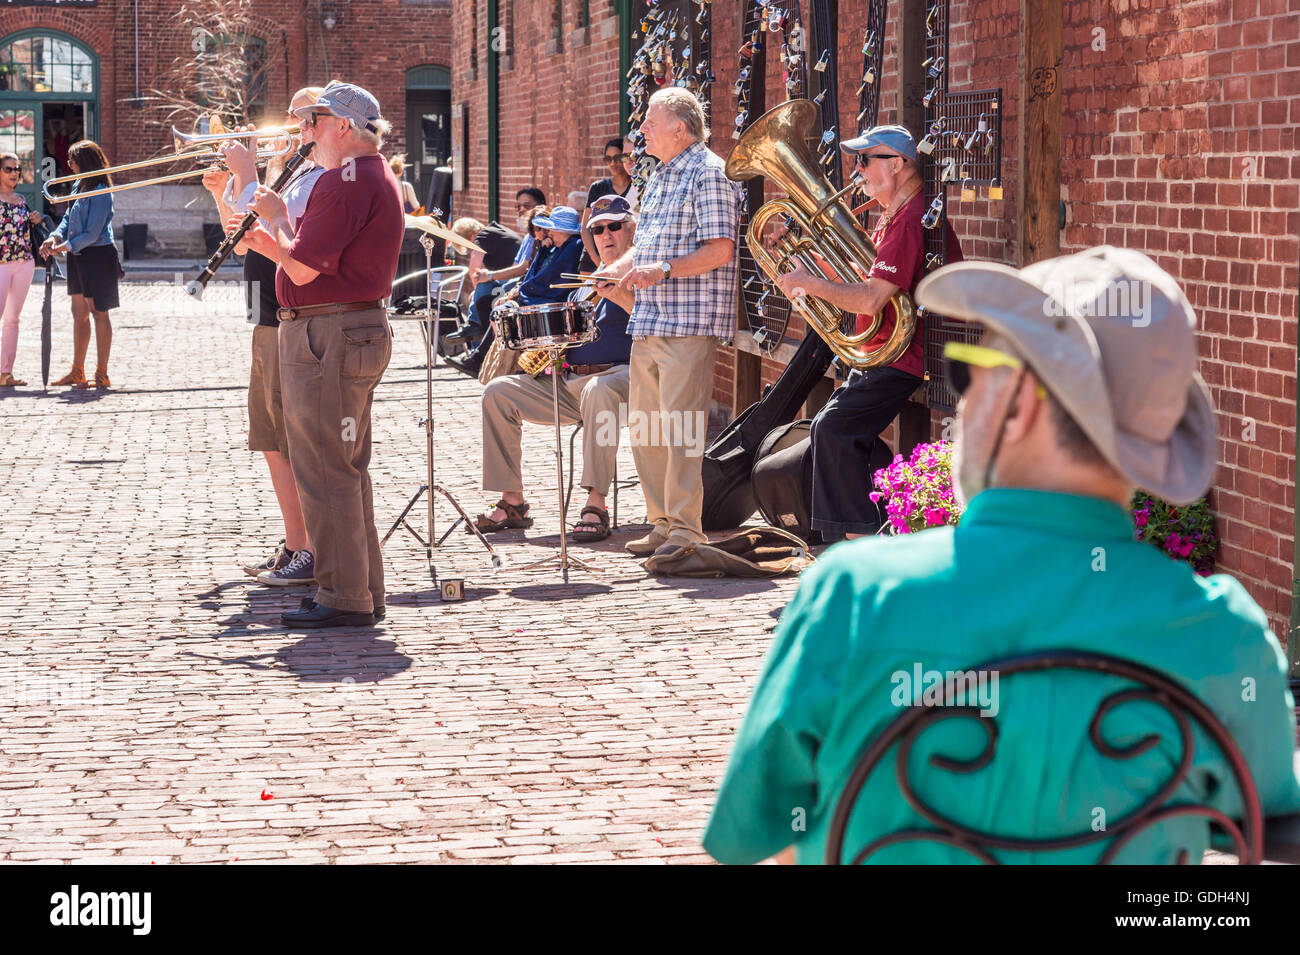 TORONTO, CANADA - JULY 1, 2016: Band playing music in the street, in Distillery District. Stock Photo